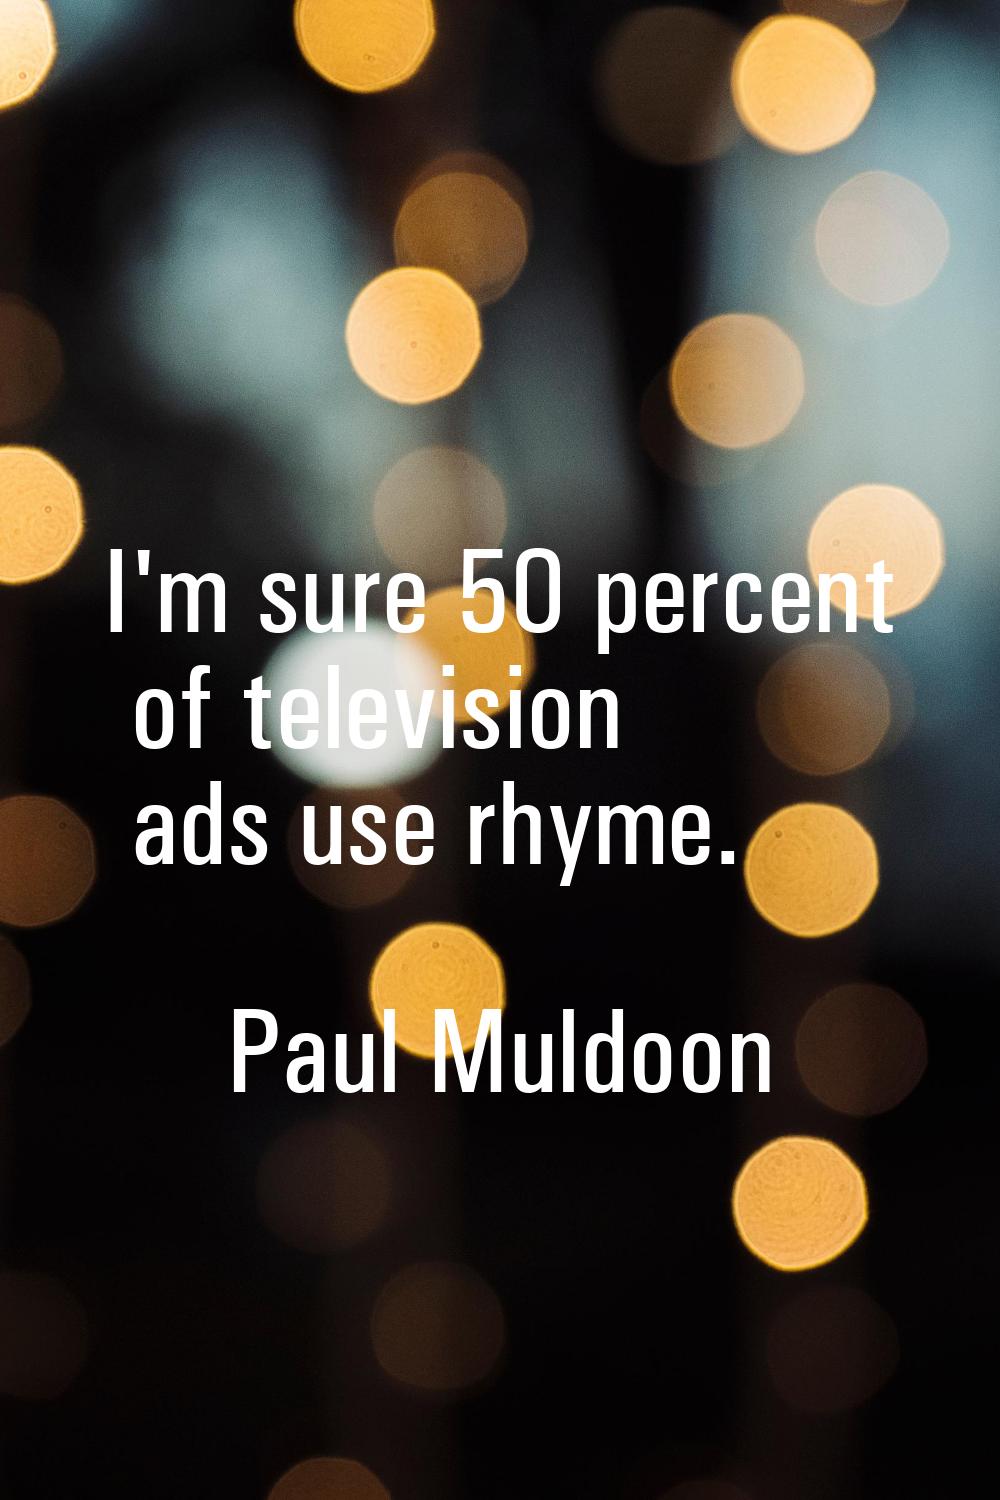 I'm sure 50 percent of television ads use rhyme.